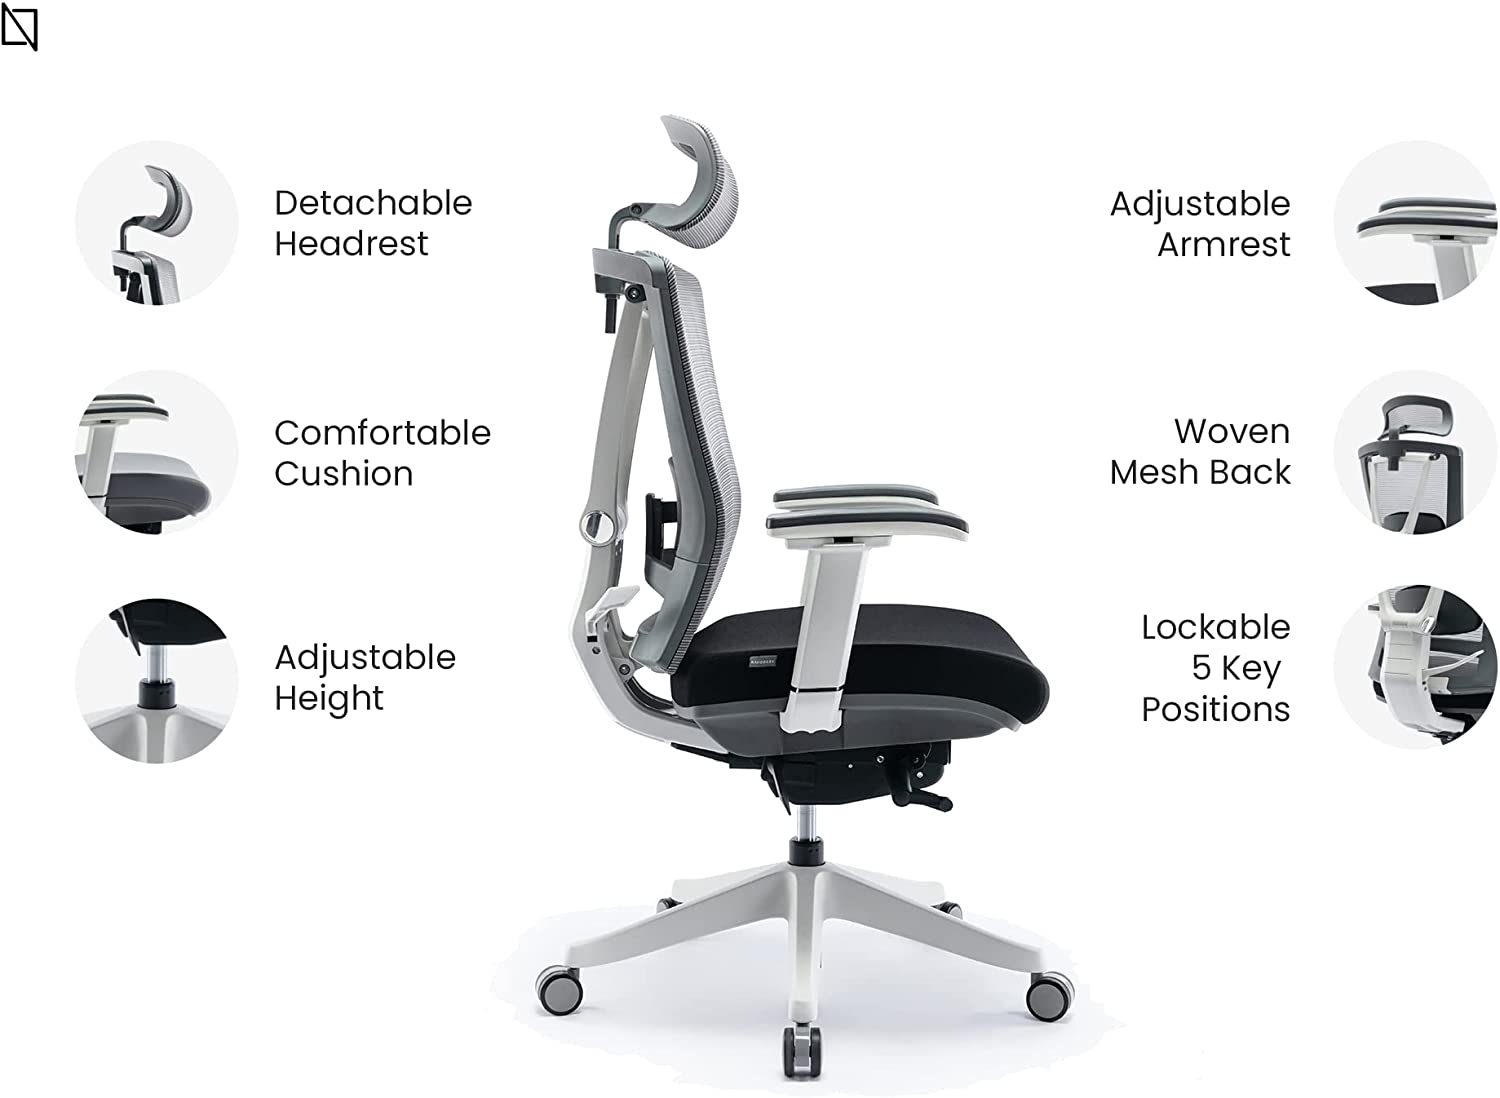 HALO Chair Premium Ergonomic Gaming & Office Chair with Multi Adjustable Features by Navodesk Black & White